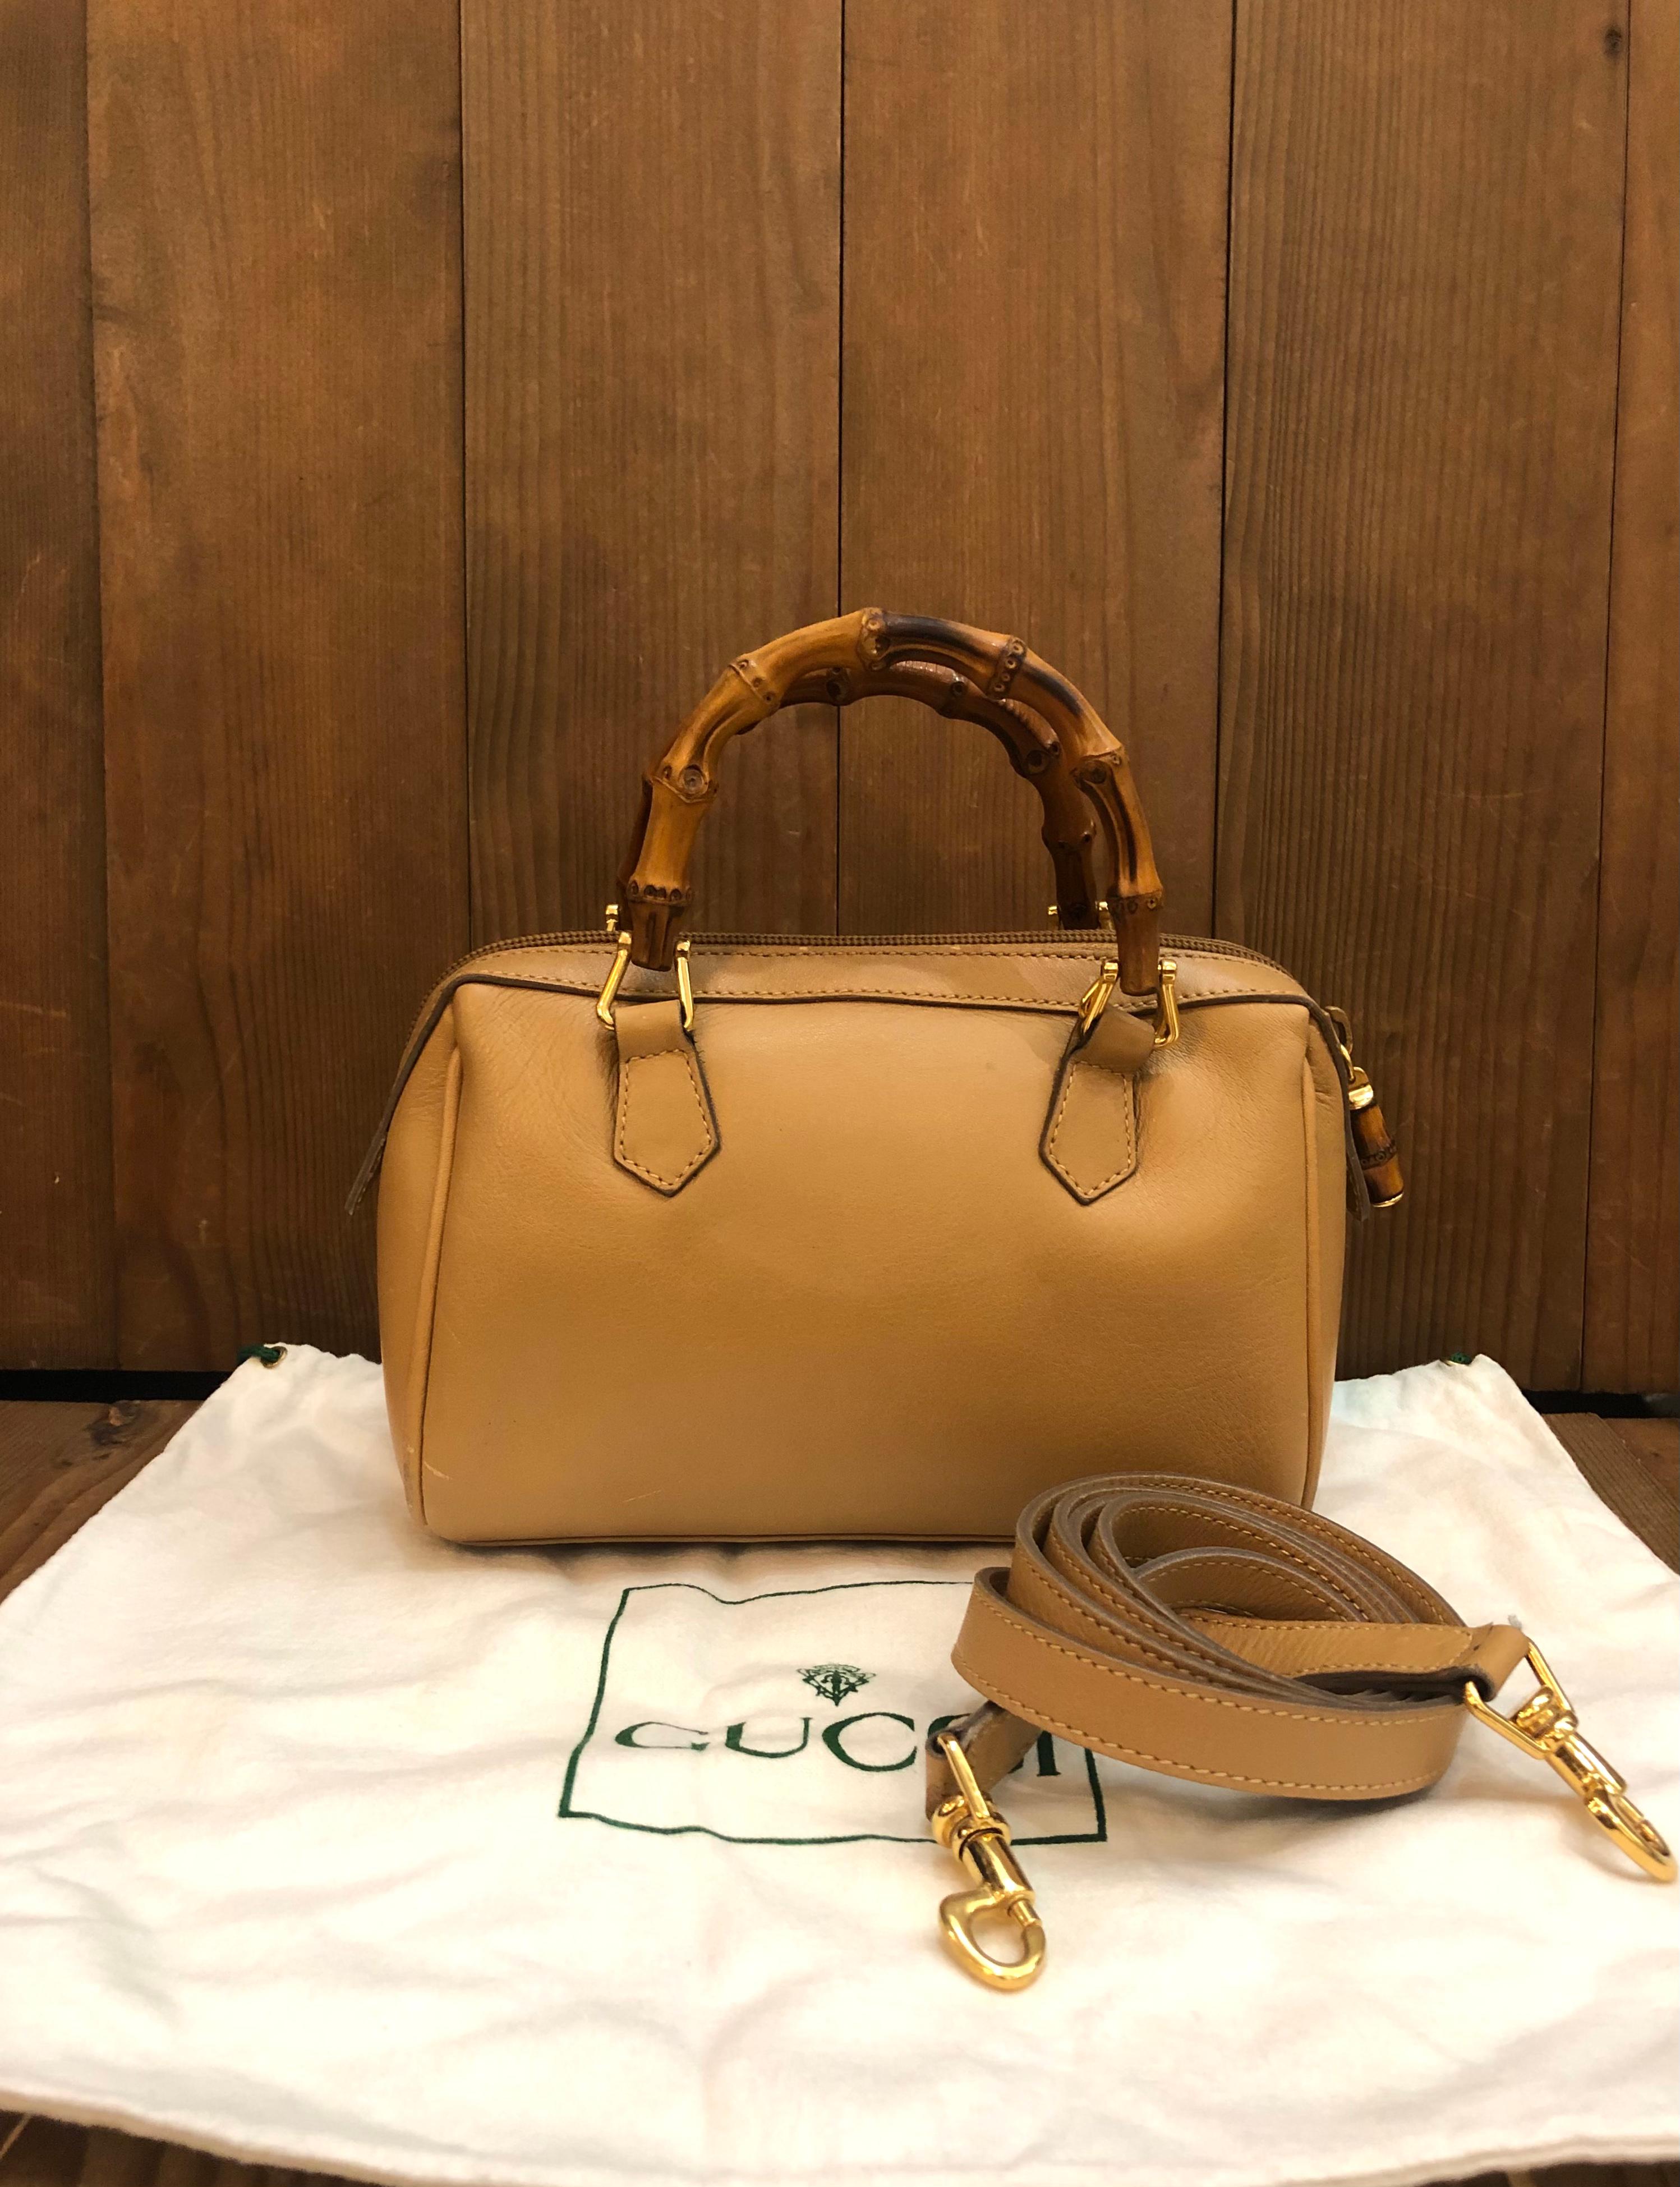 This 1990s vintage GUCCI mini two-way boston crossbody handbag is crafted of smooth calfskin leather in beige featuring gold toned hardware and bamboo handles. Top zipper closure opens to new interior in beige. This mini Gucci also features a